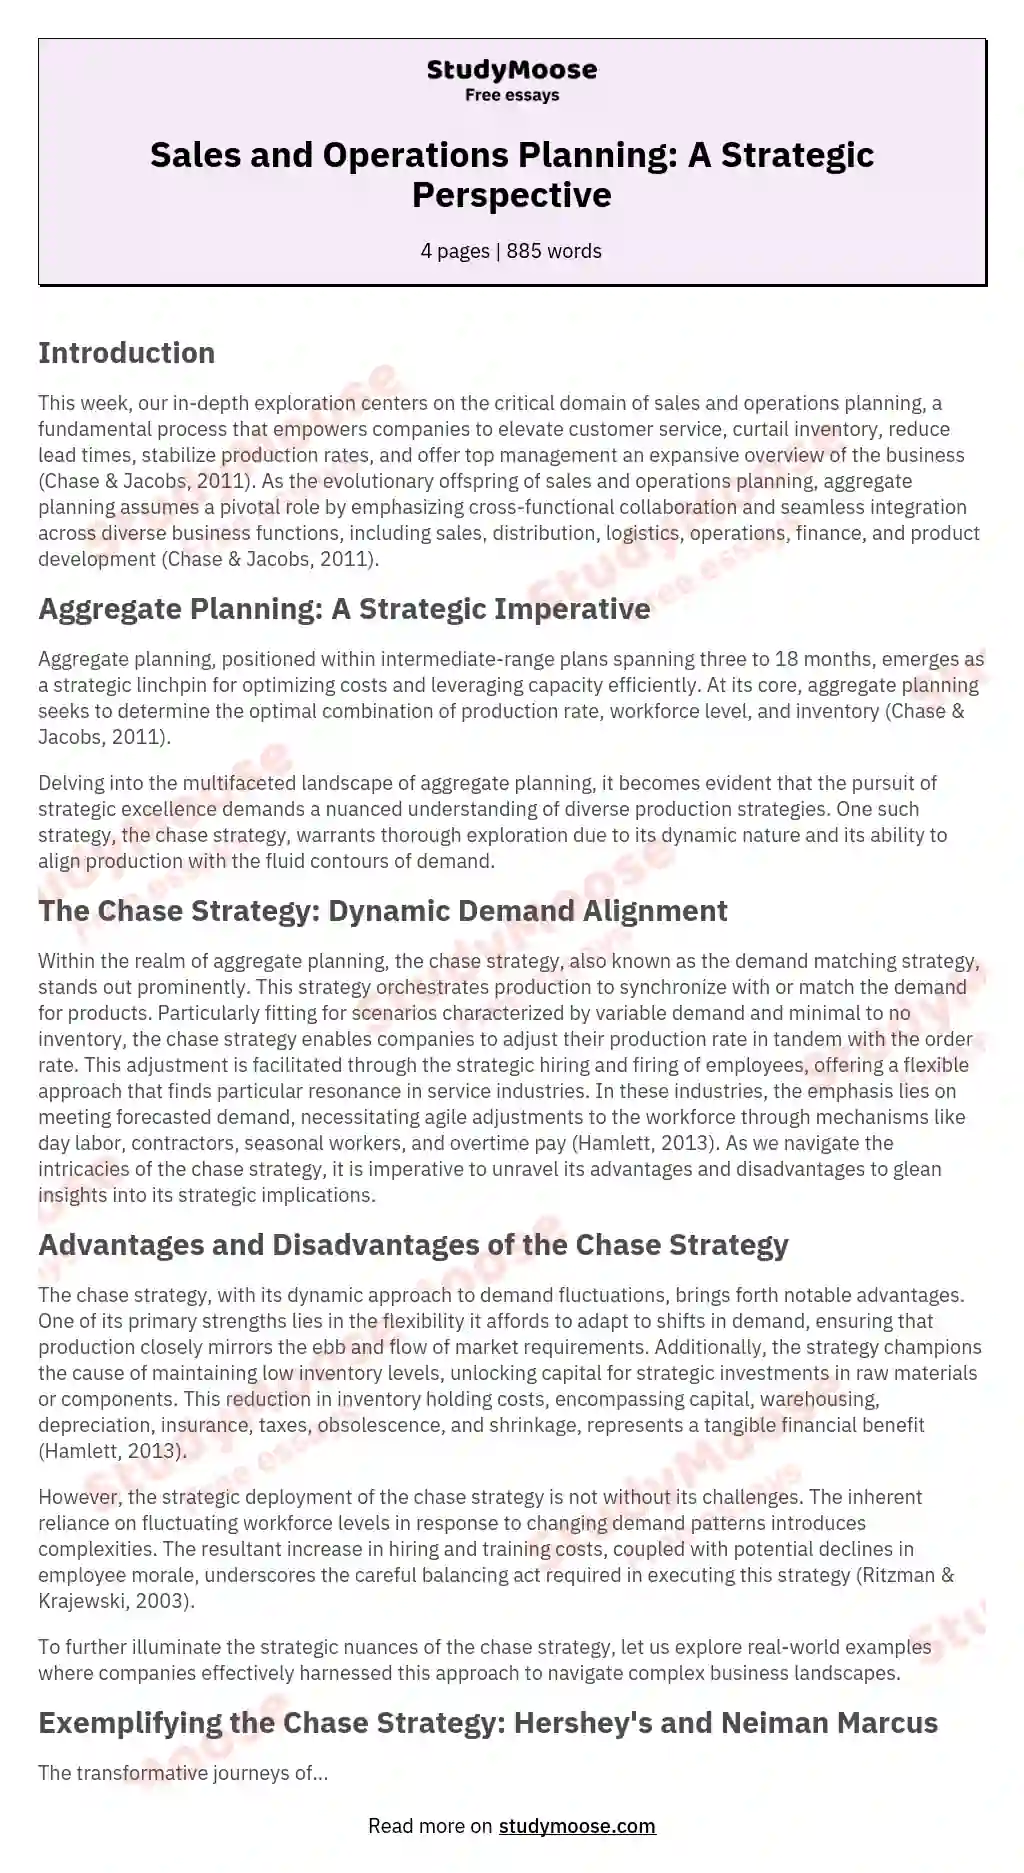 Sales and Operations Planning: A Strategic Perspective essay